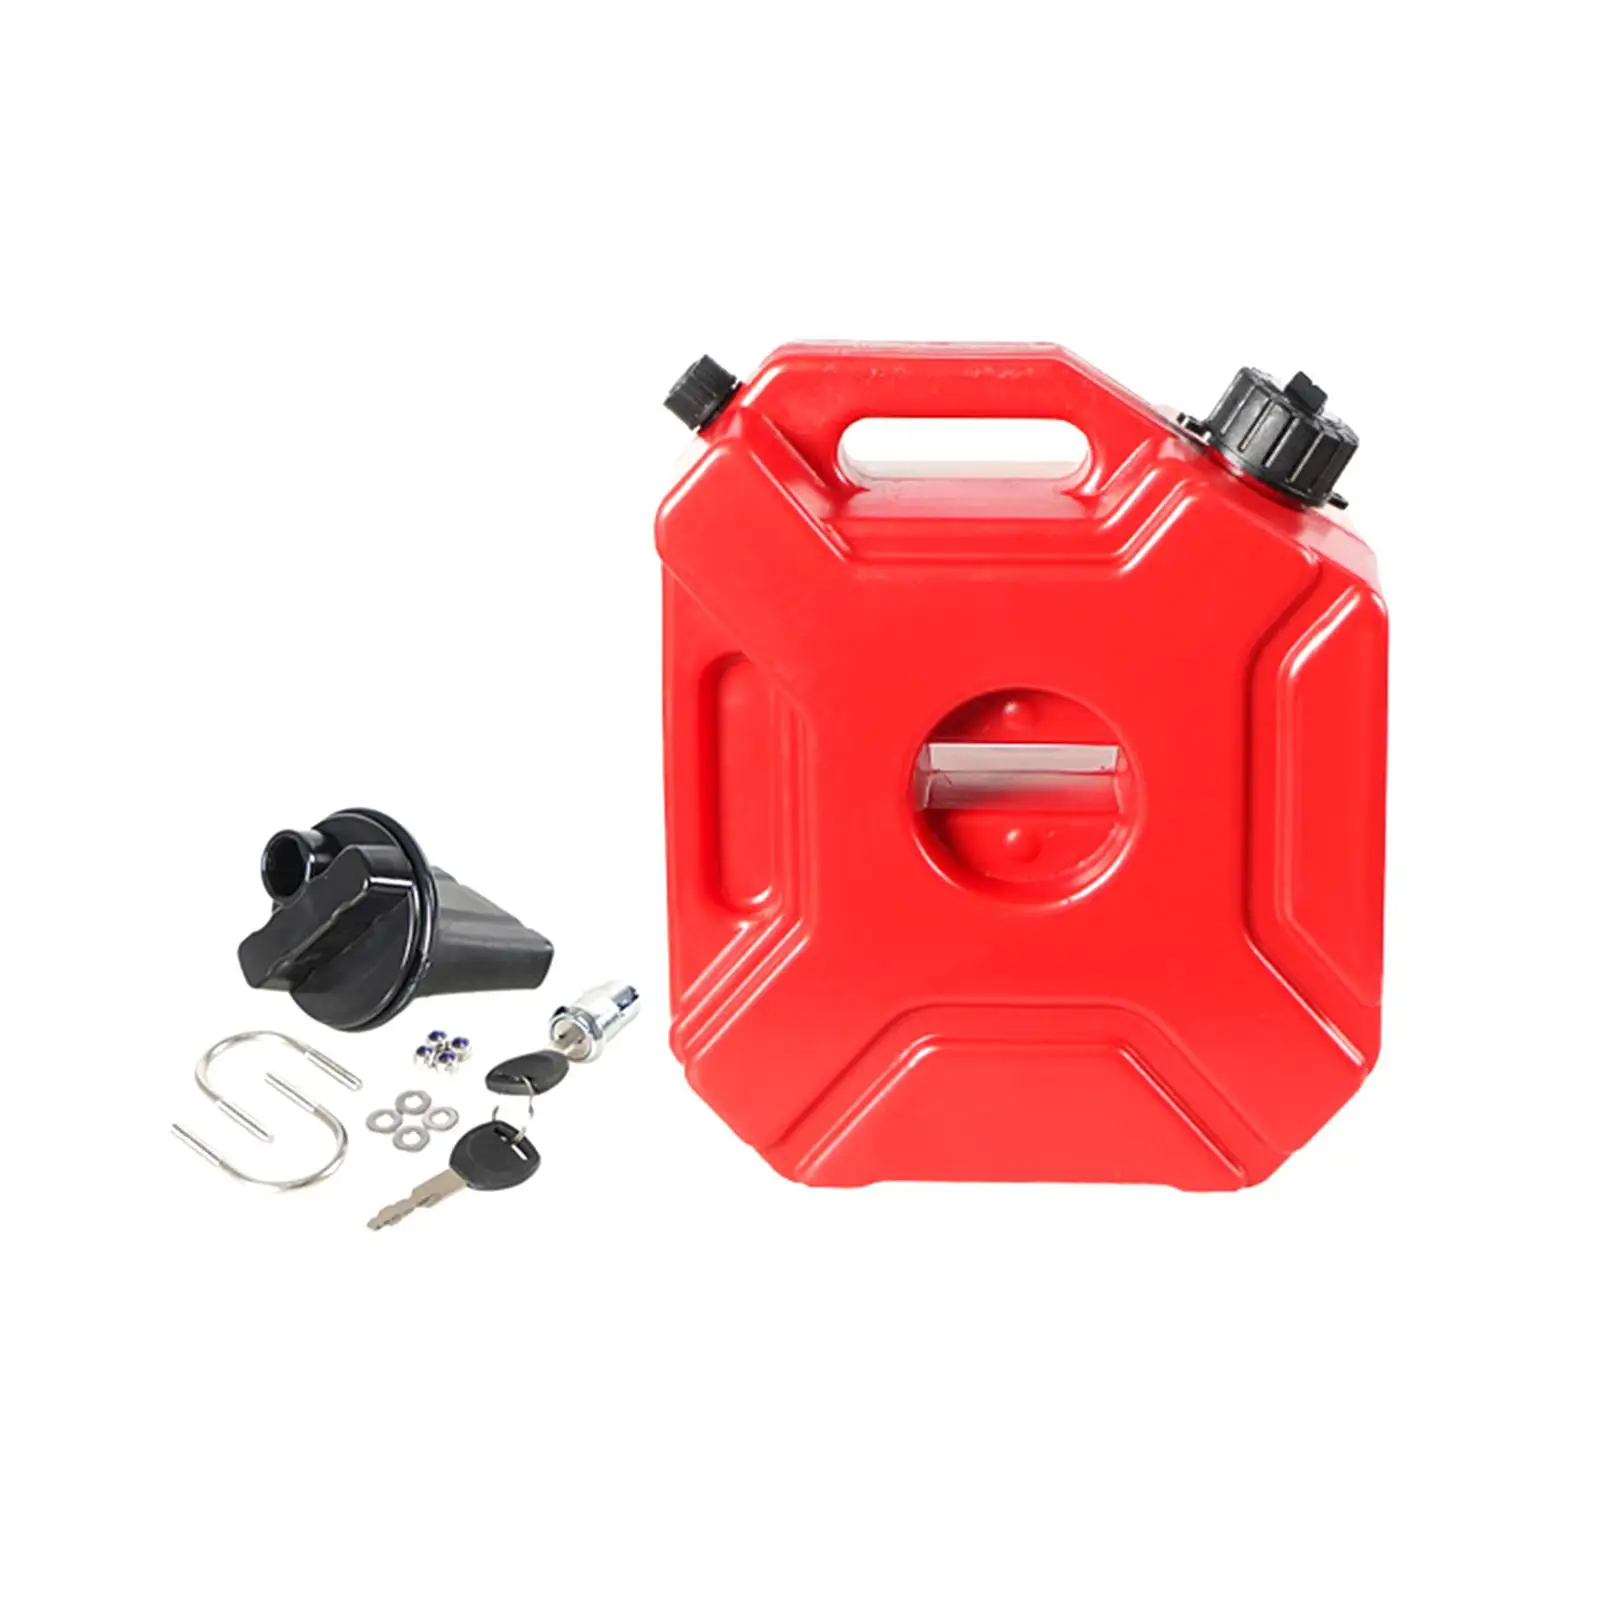 Gas Petrol Fuel Tank 5L Easy to Mount Fuel Tank Cans Spare Fuel Container for